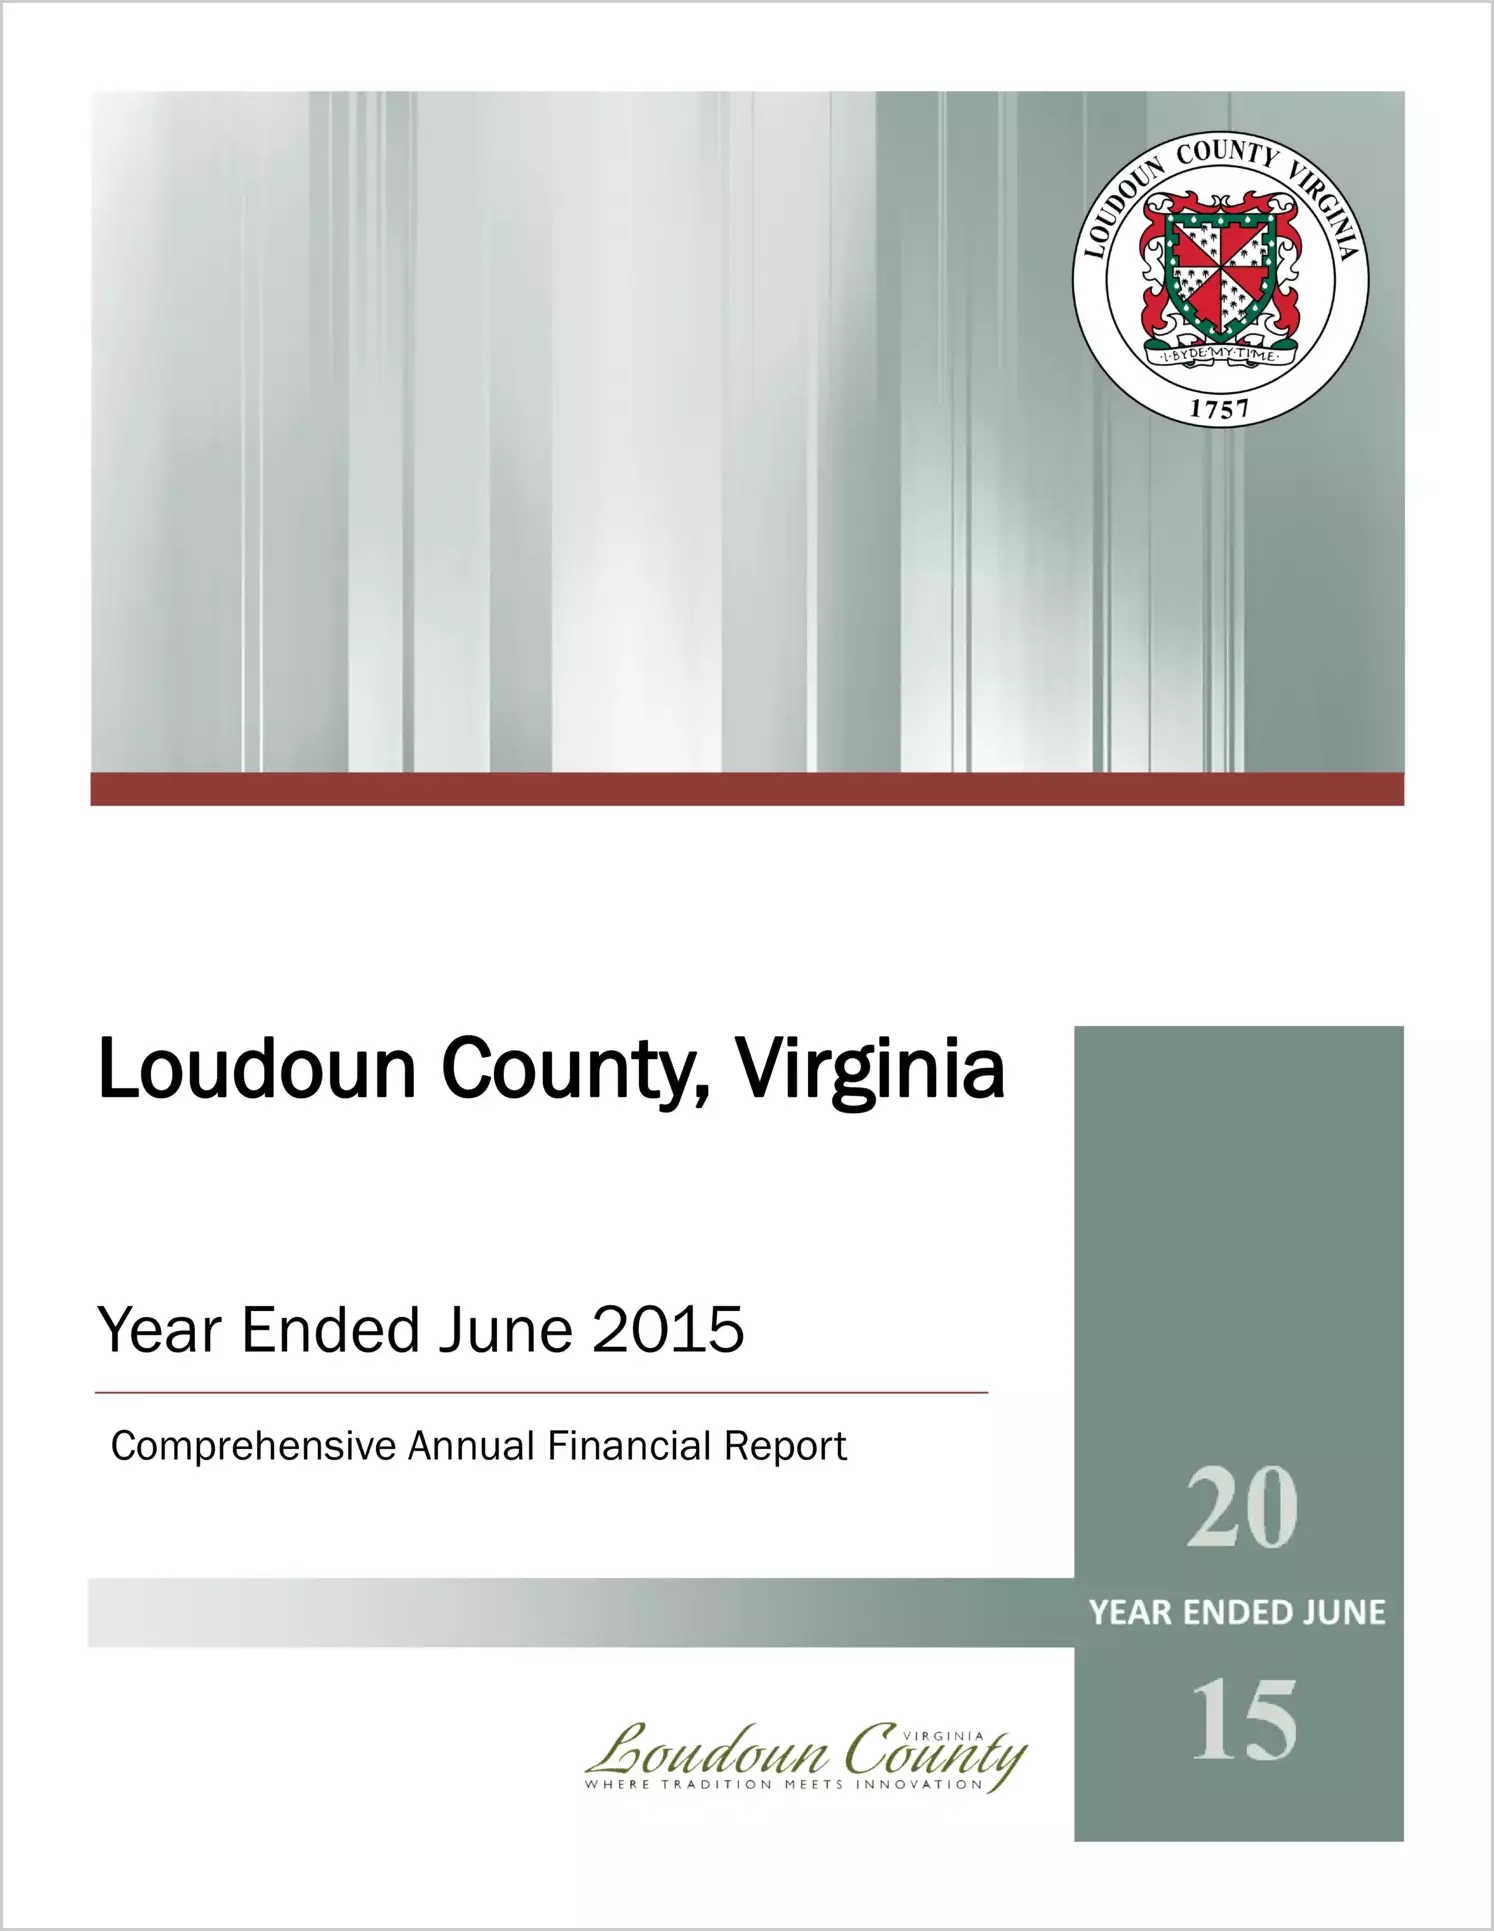 2015 Annual Financial Report for County of Loudoun